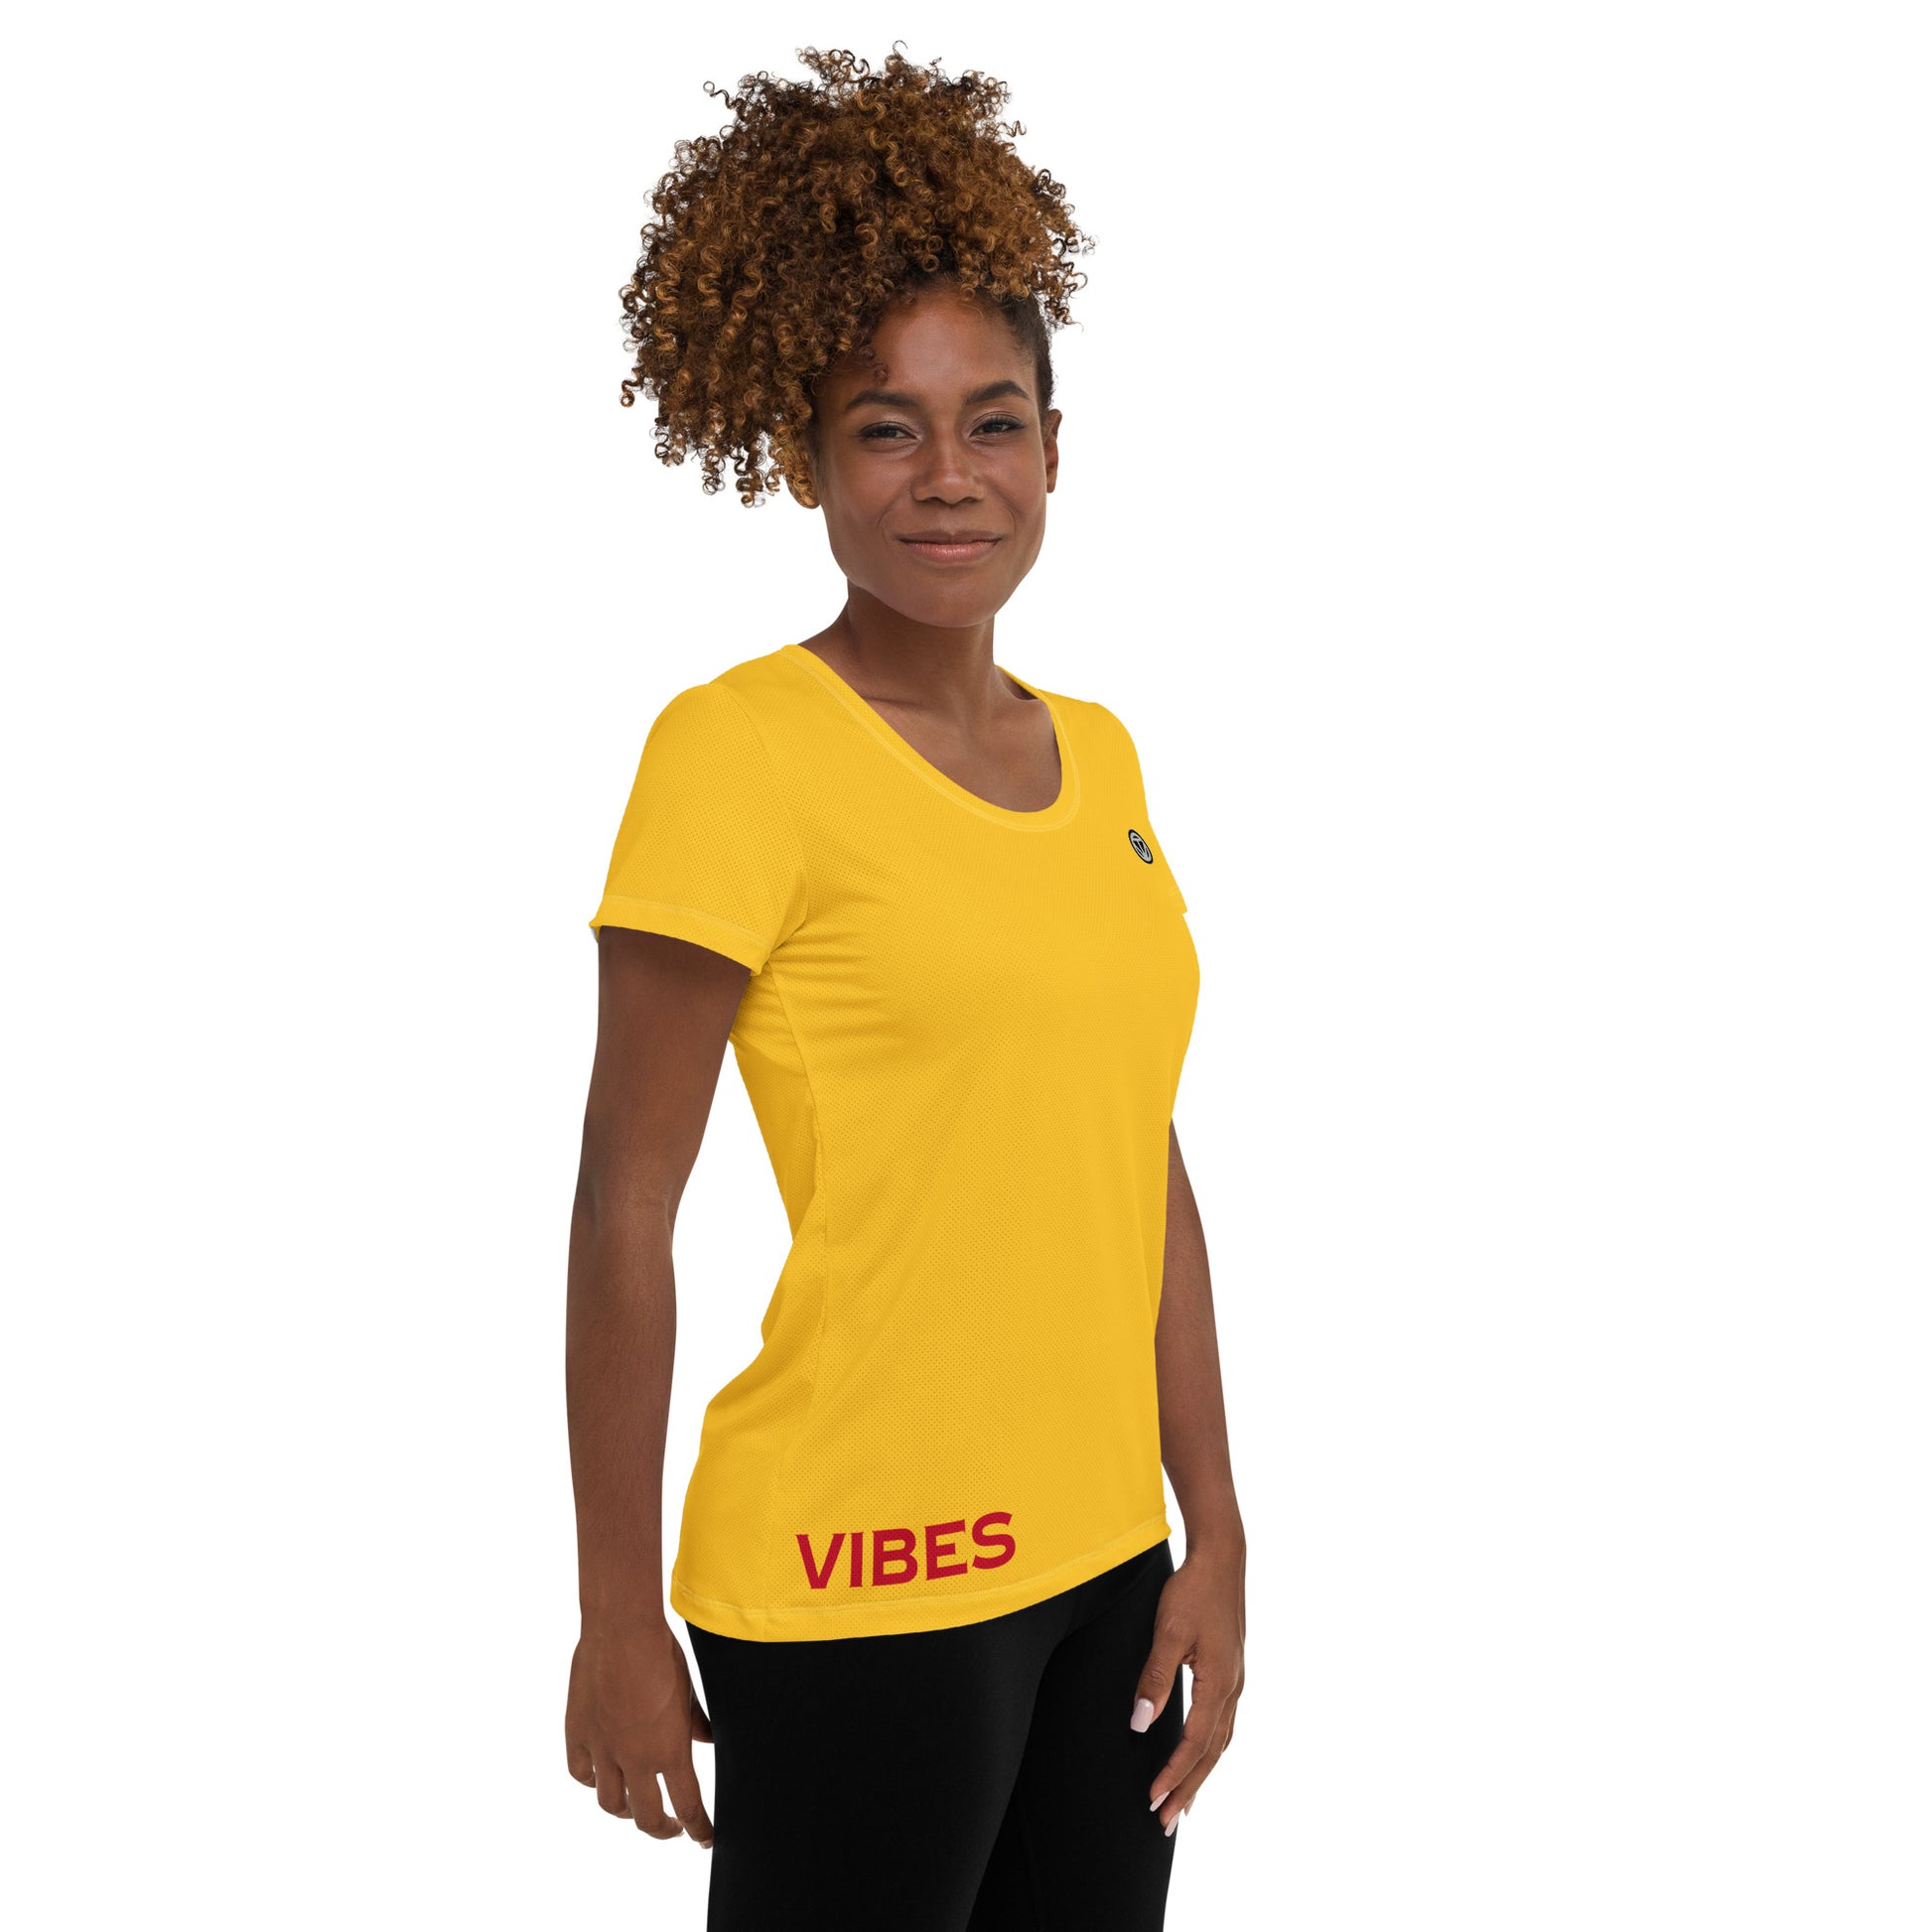 TIME OF VIBES - Women's Athletic T-shirt VIBES (Yellow) - €45.00